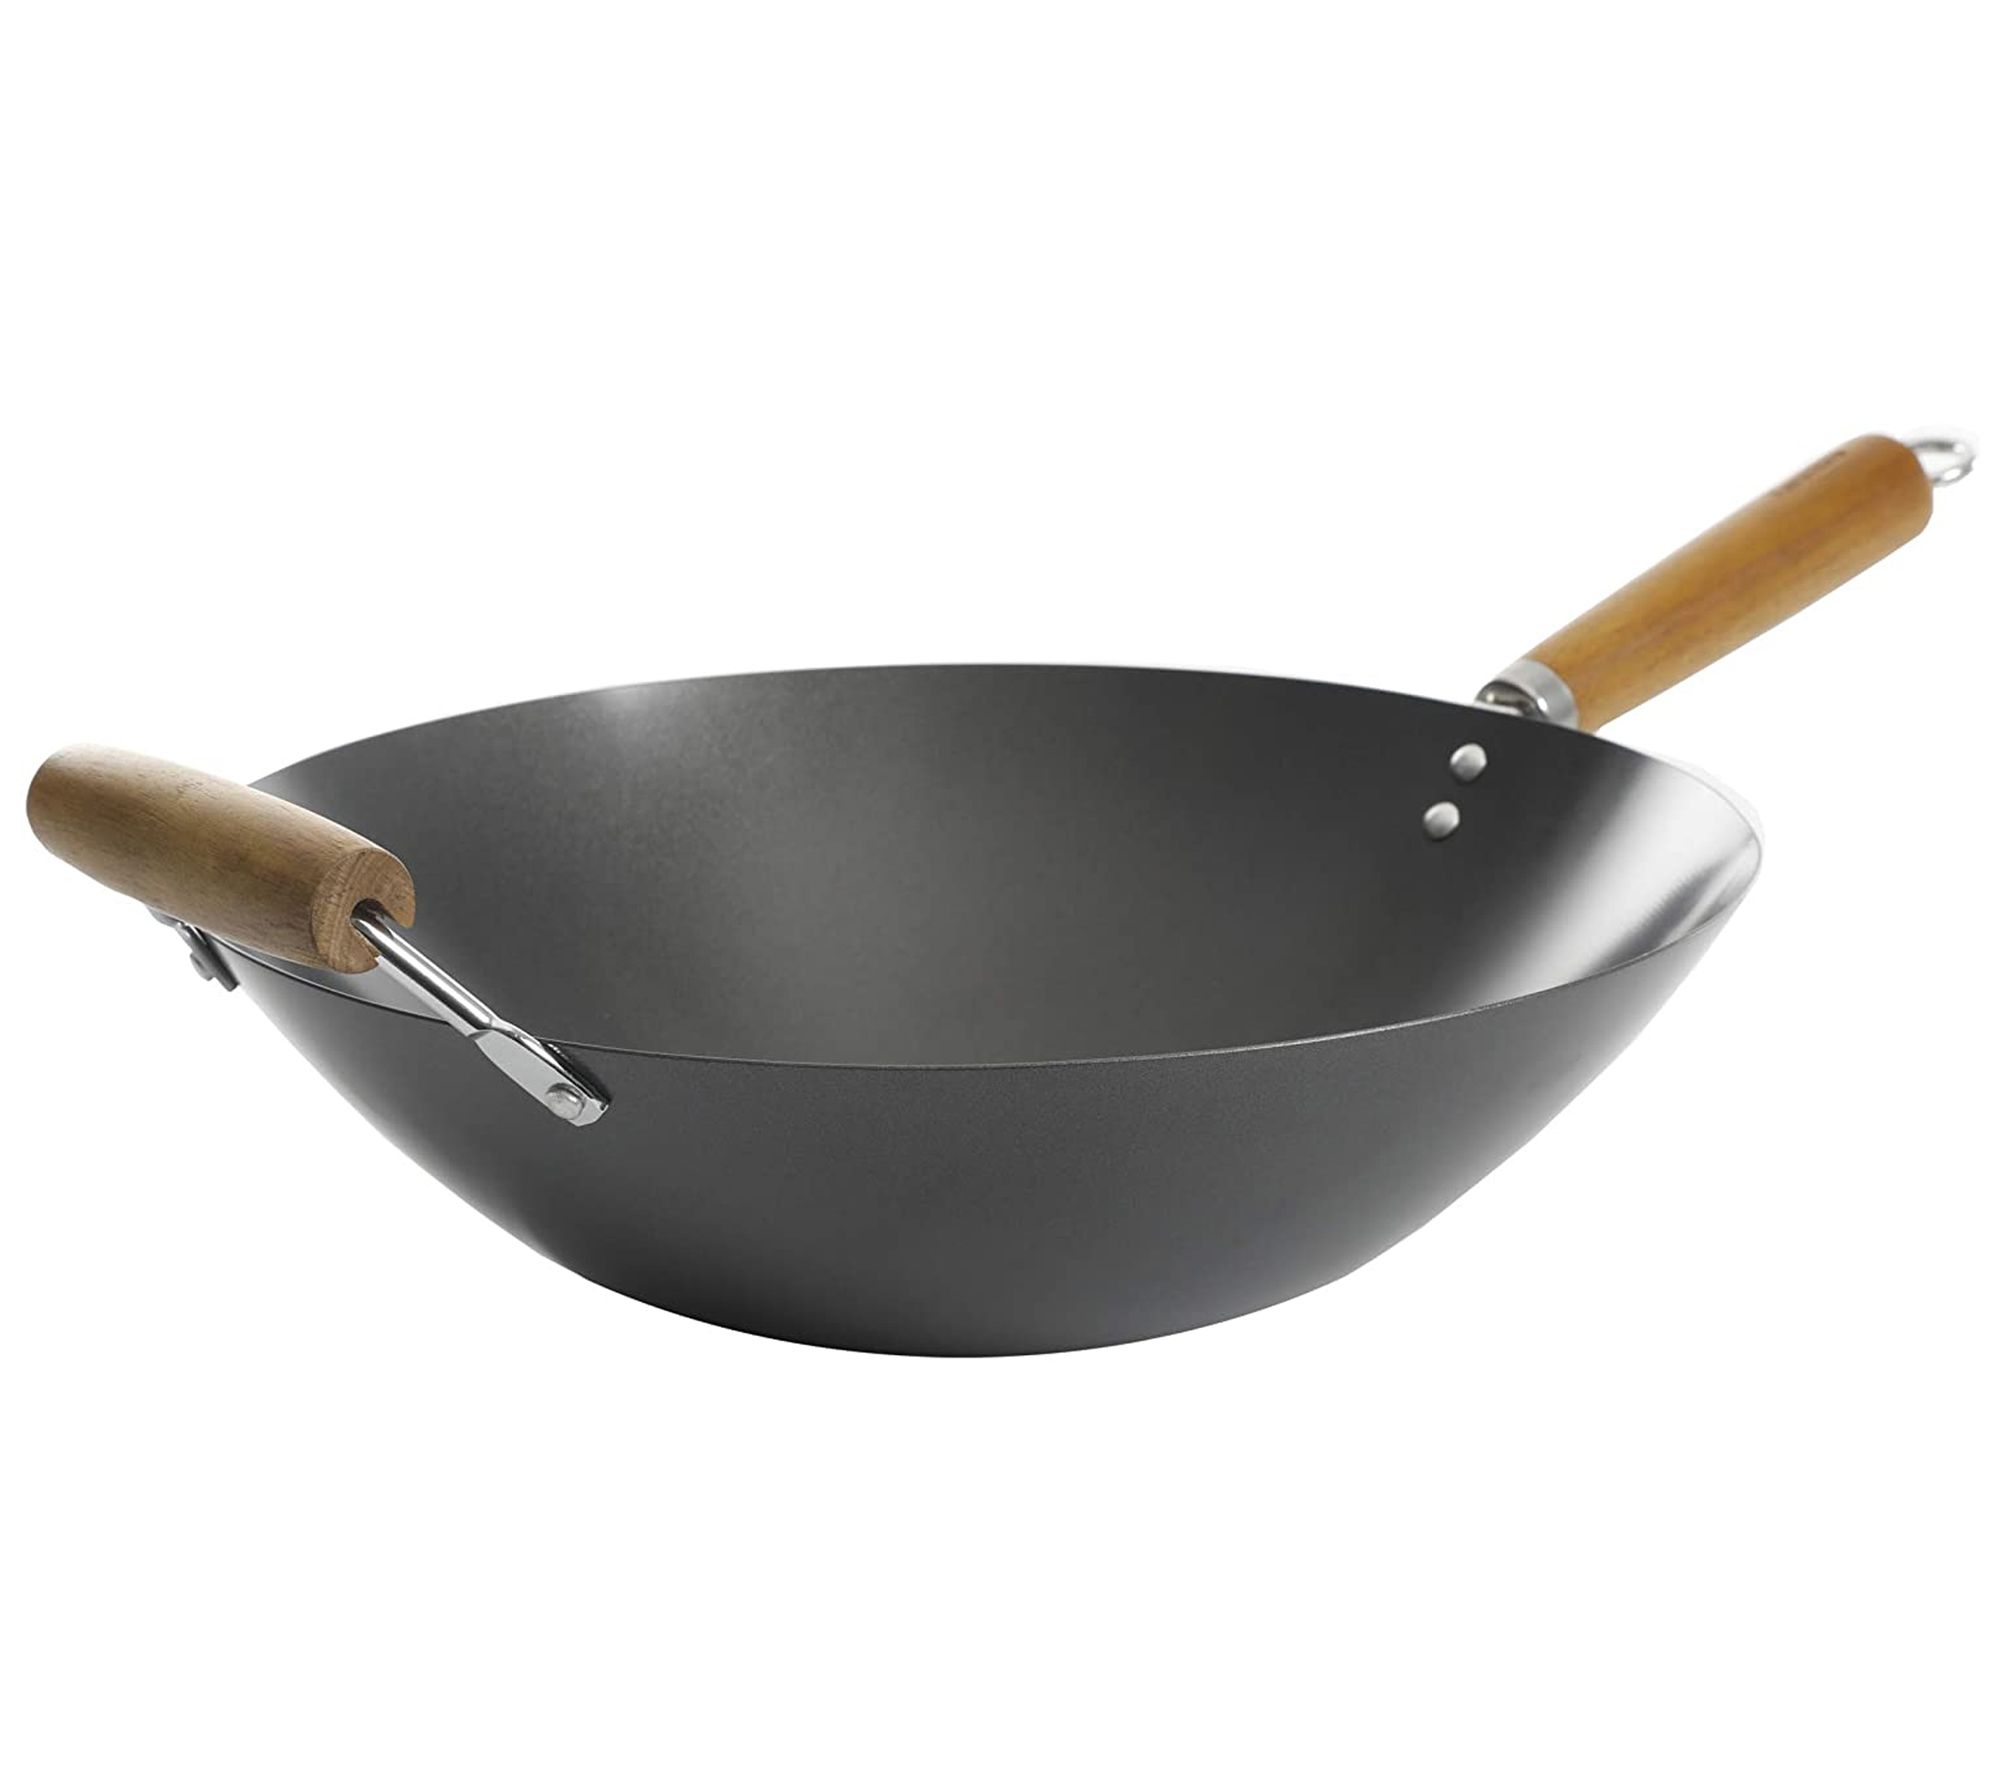 Bene Casa stainless-steel 22.4-inch Comal pan, belly up, rust free